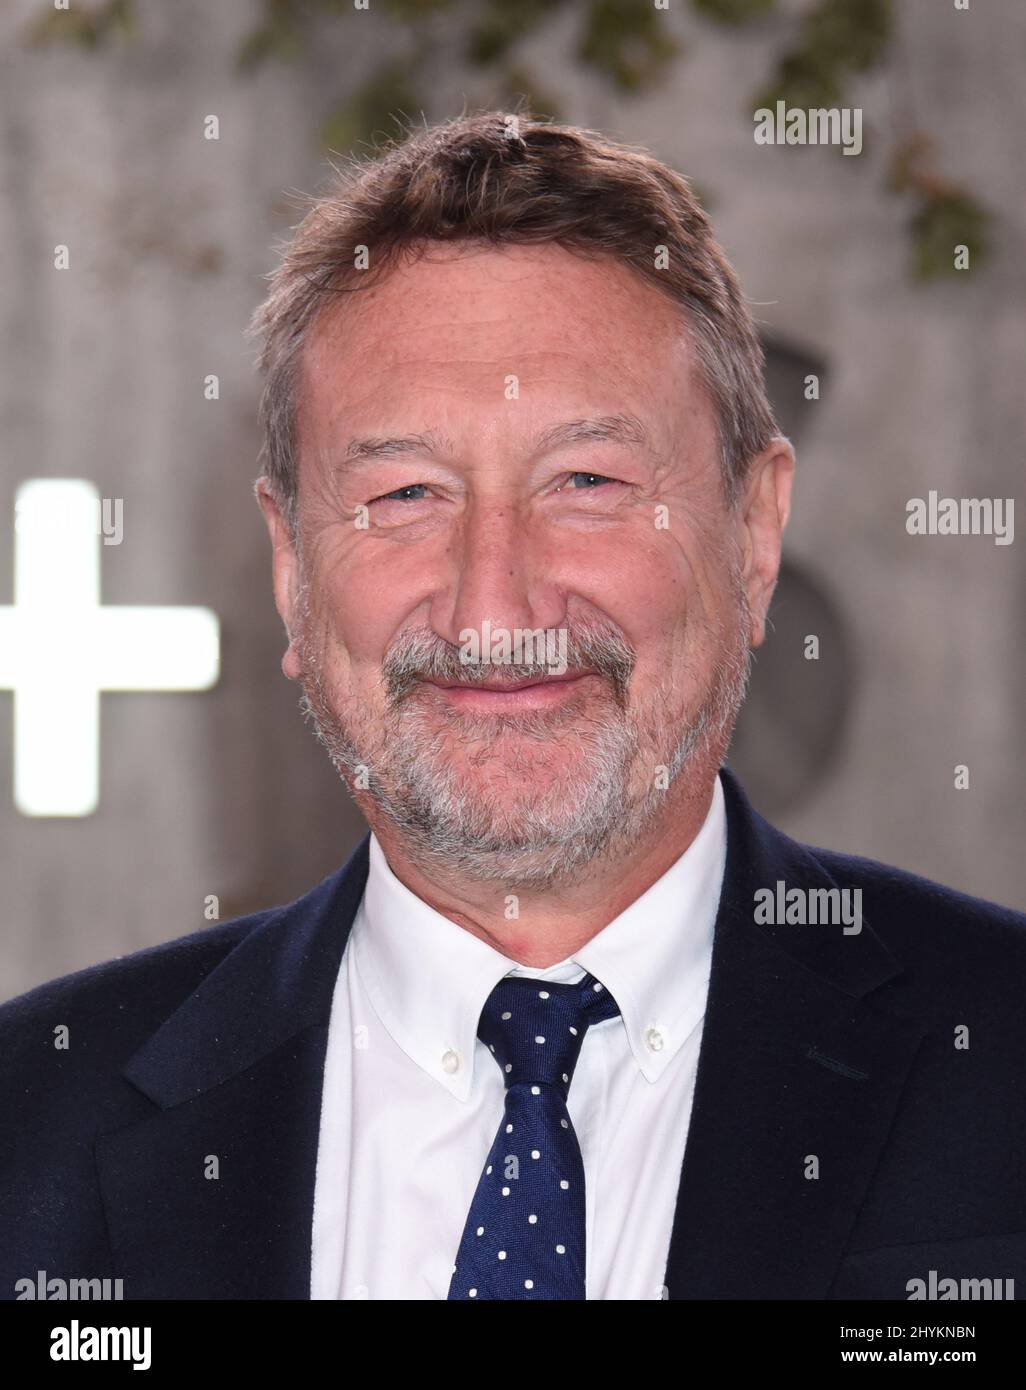 Steven Knight at Apple TV+'s 'See' World Premiere held at the Regency Village Theatre on October 21, 2019 in Westwood, CA. Stock Photo